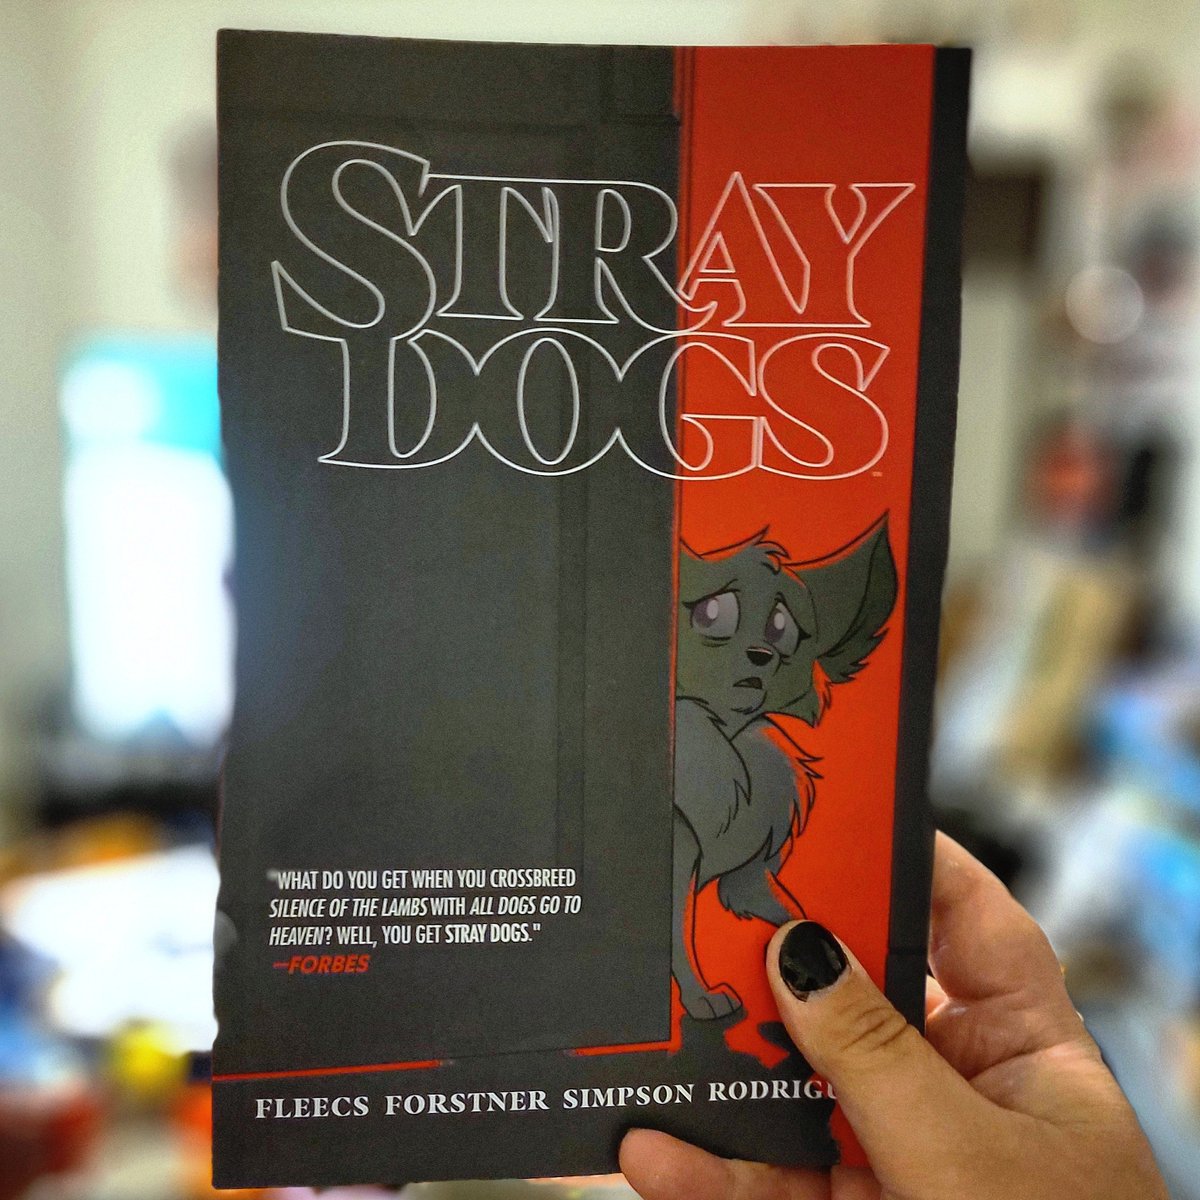 Time to see what all the hype is about! #StrayDogs #StrayDogsComic